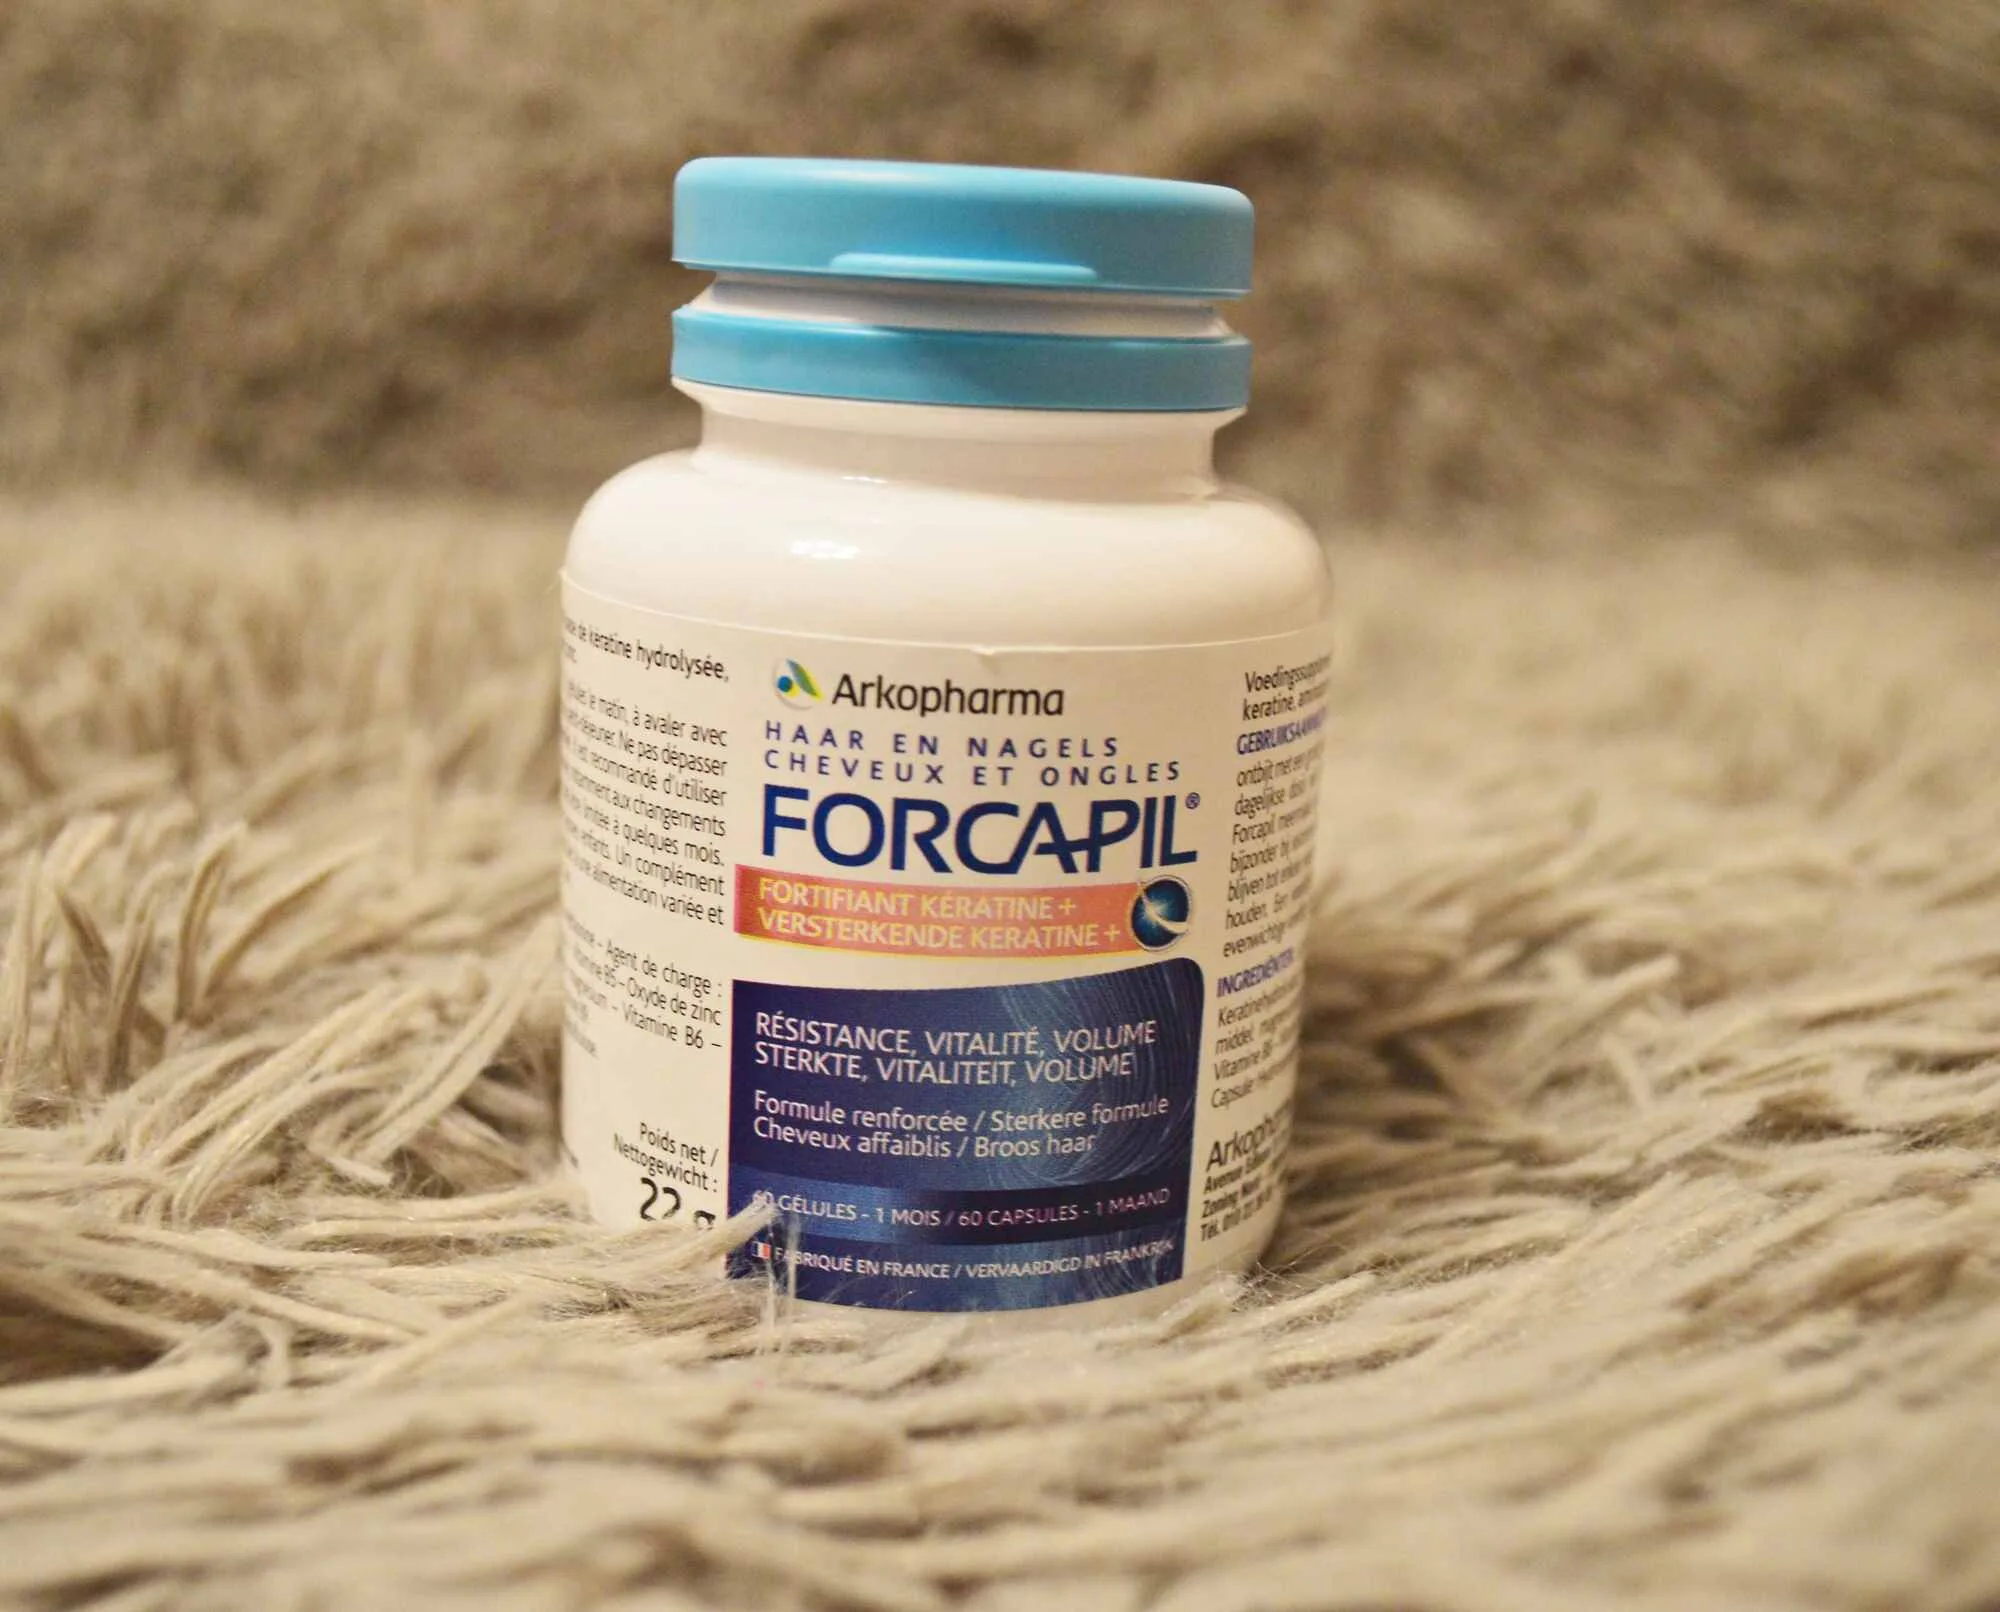 Forcapil Fortifiant Keratine + : Review si Pareri personale